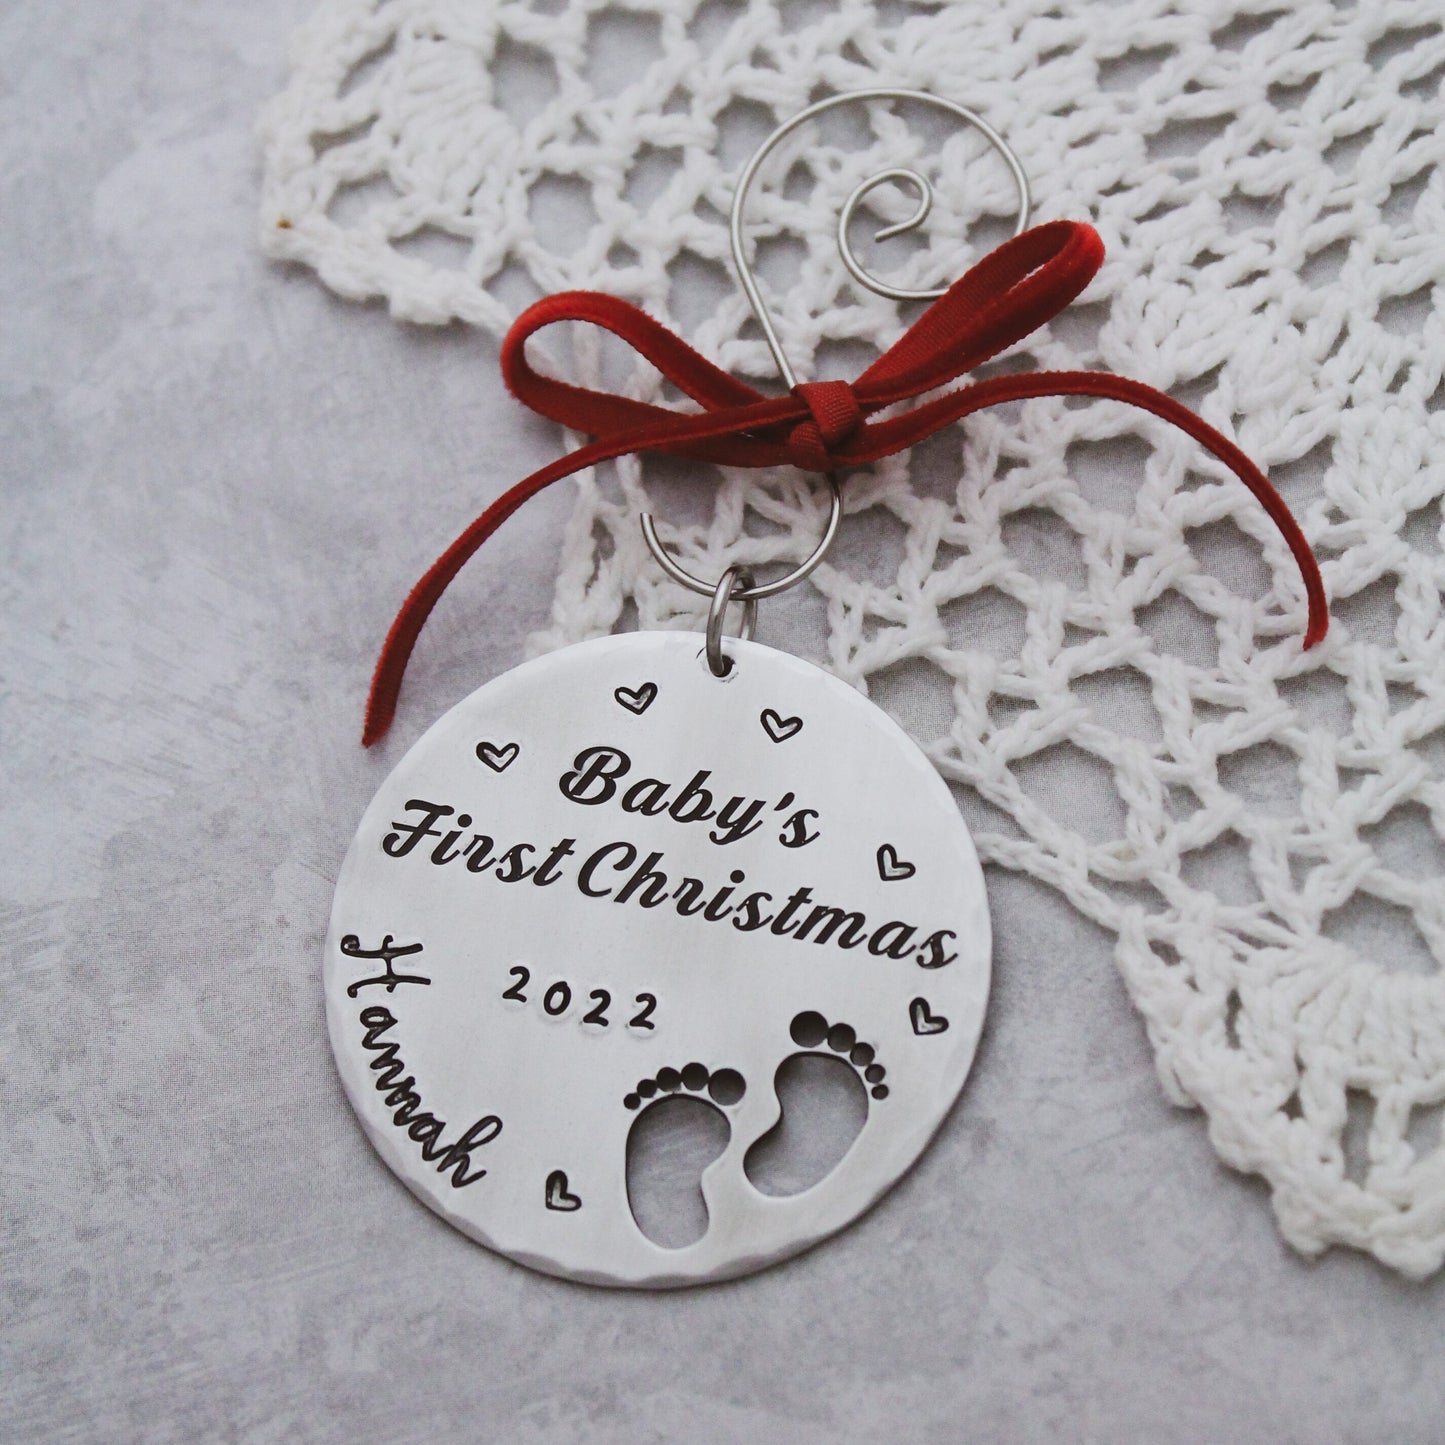 Personalized Baby's First Christmas Ornament, Baby Feet Christmas Ornament, New Baby Gift, Baby Gift, Personalized Hand Stamped Aluminum